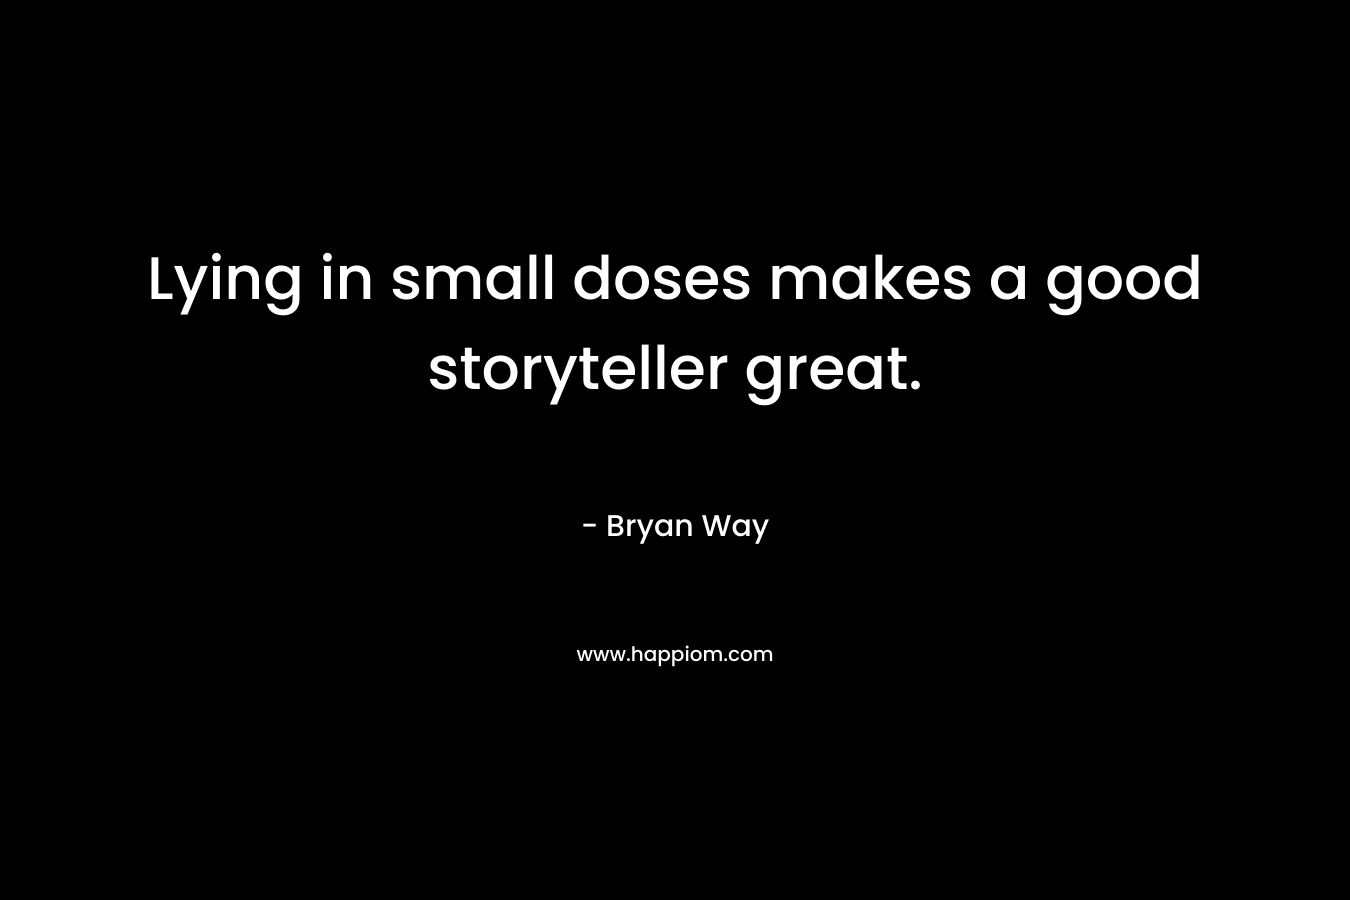 Lying in small doses makes a good storyteller great. – Bryan Way